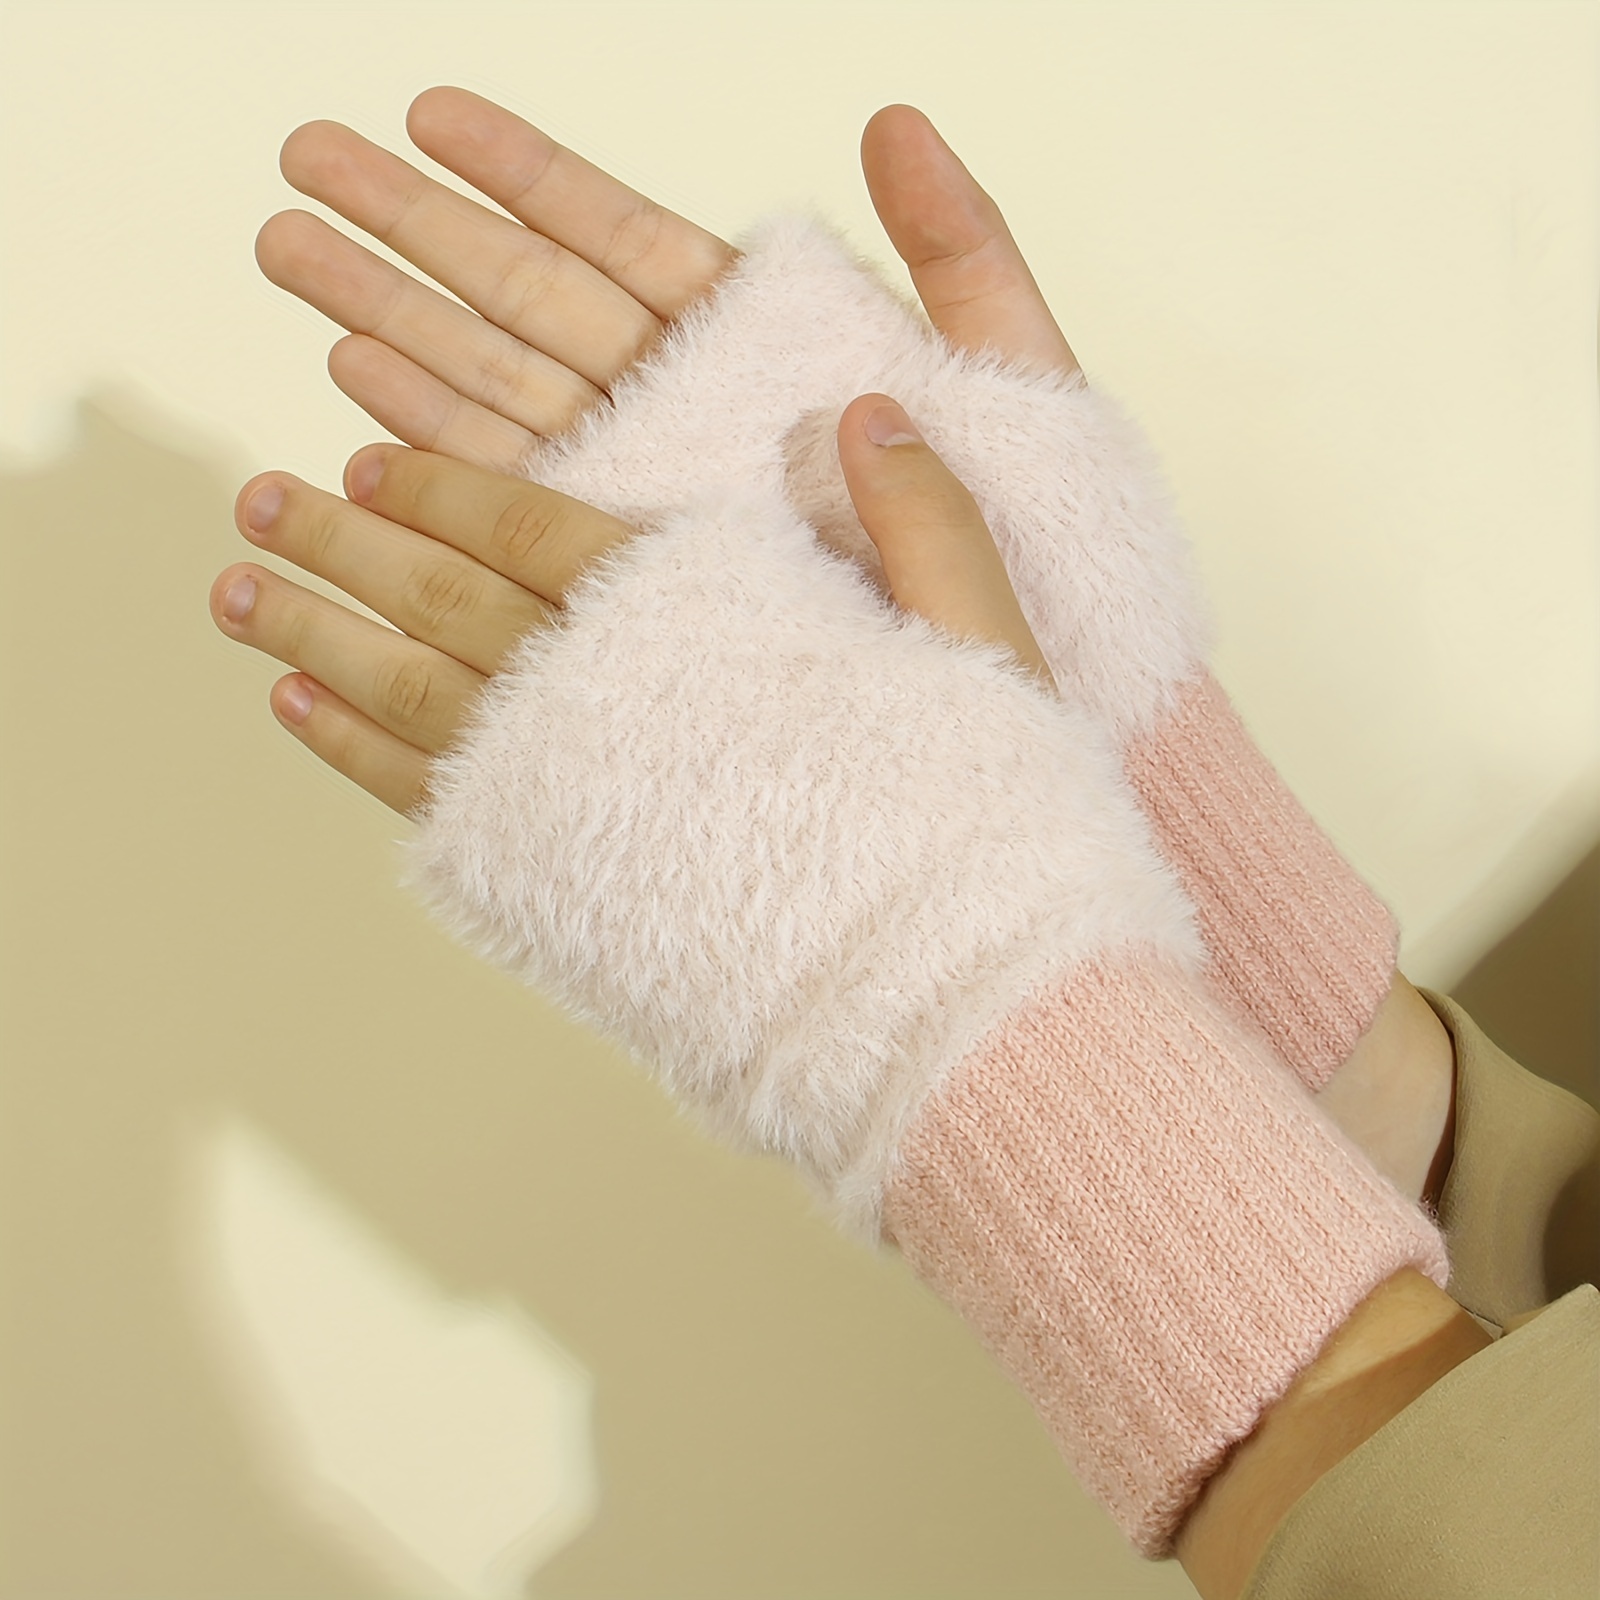 Biplut 1 Pair Women Gloves Half Finger Flip Fuzzy Solid Color Stretchy Keep  Warm Super Soft Autumn Winter Lady Writing Gloves for Going Out 